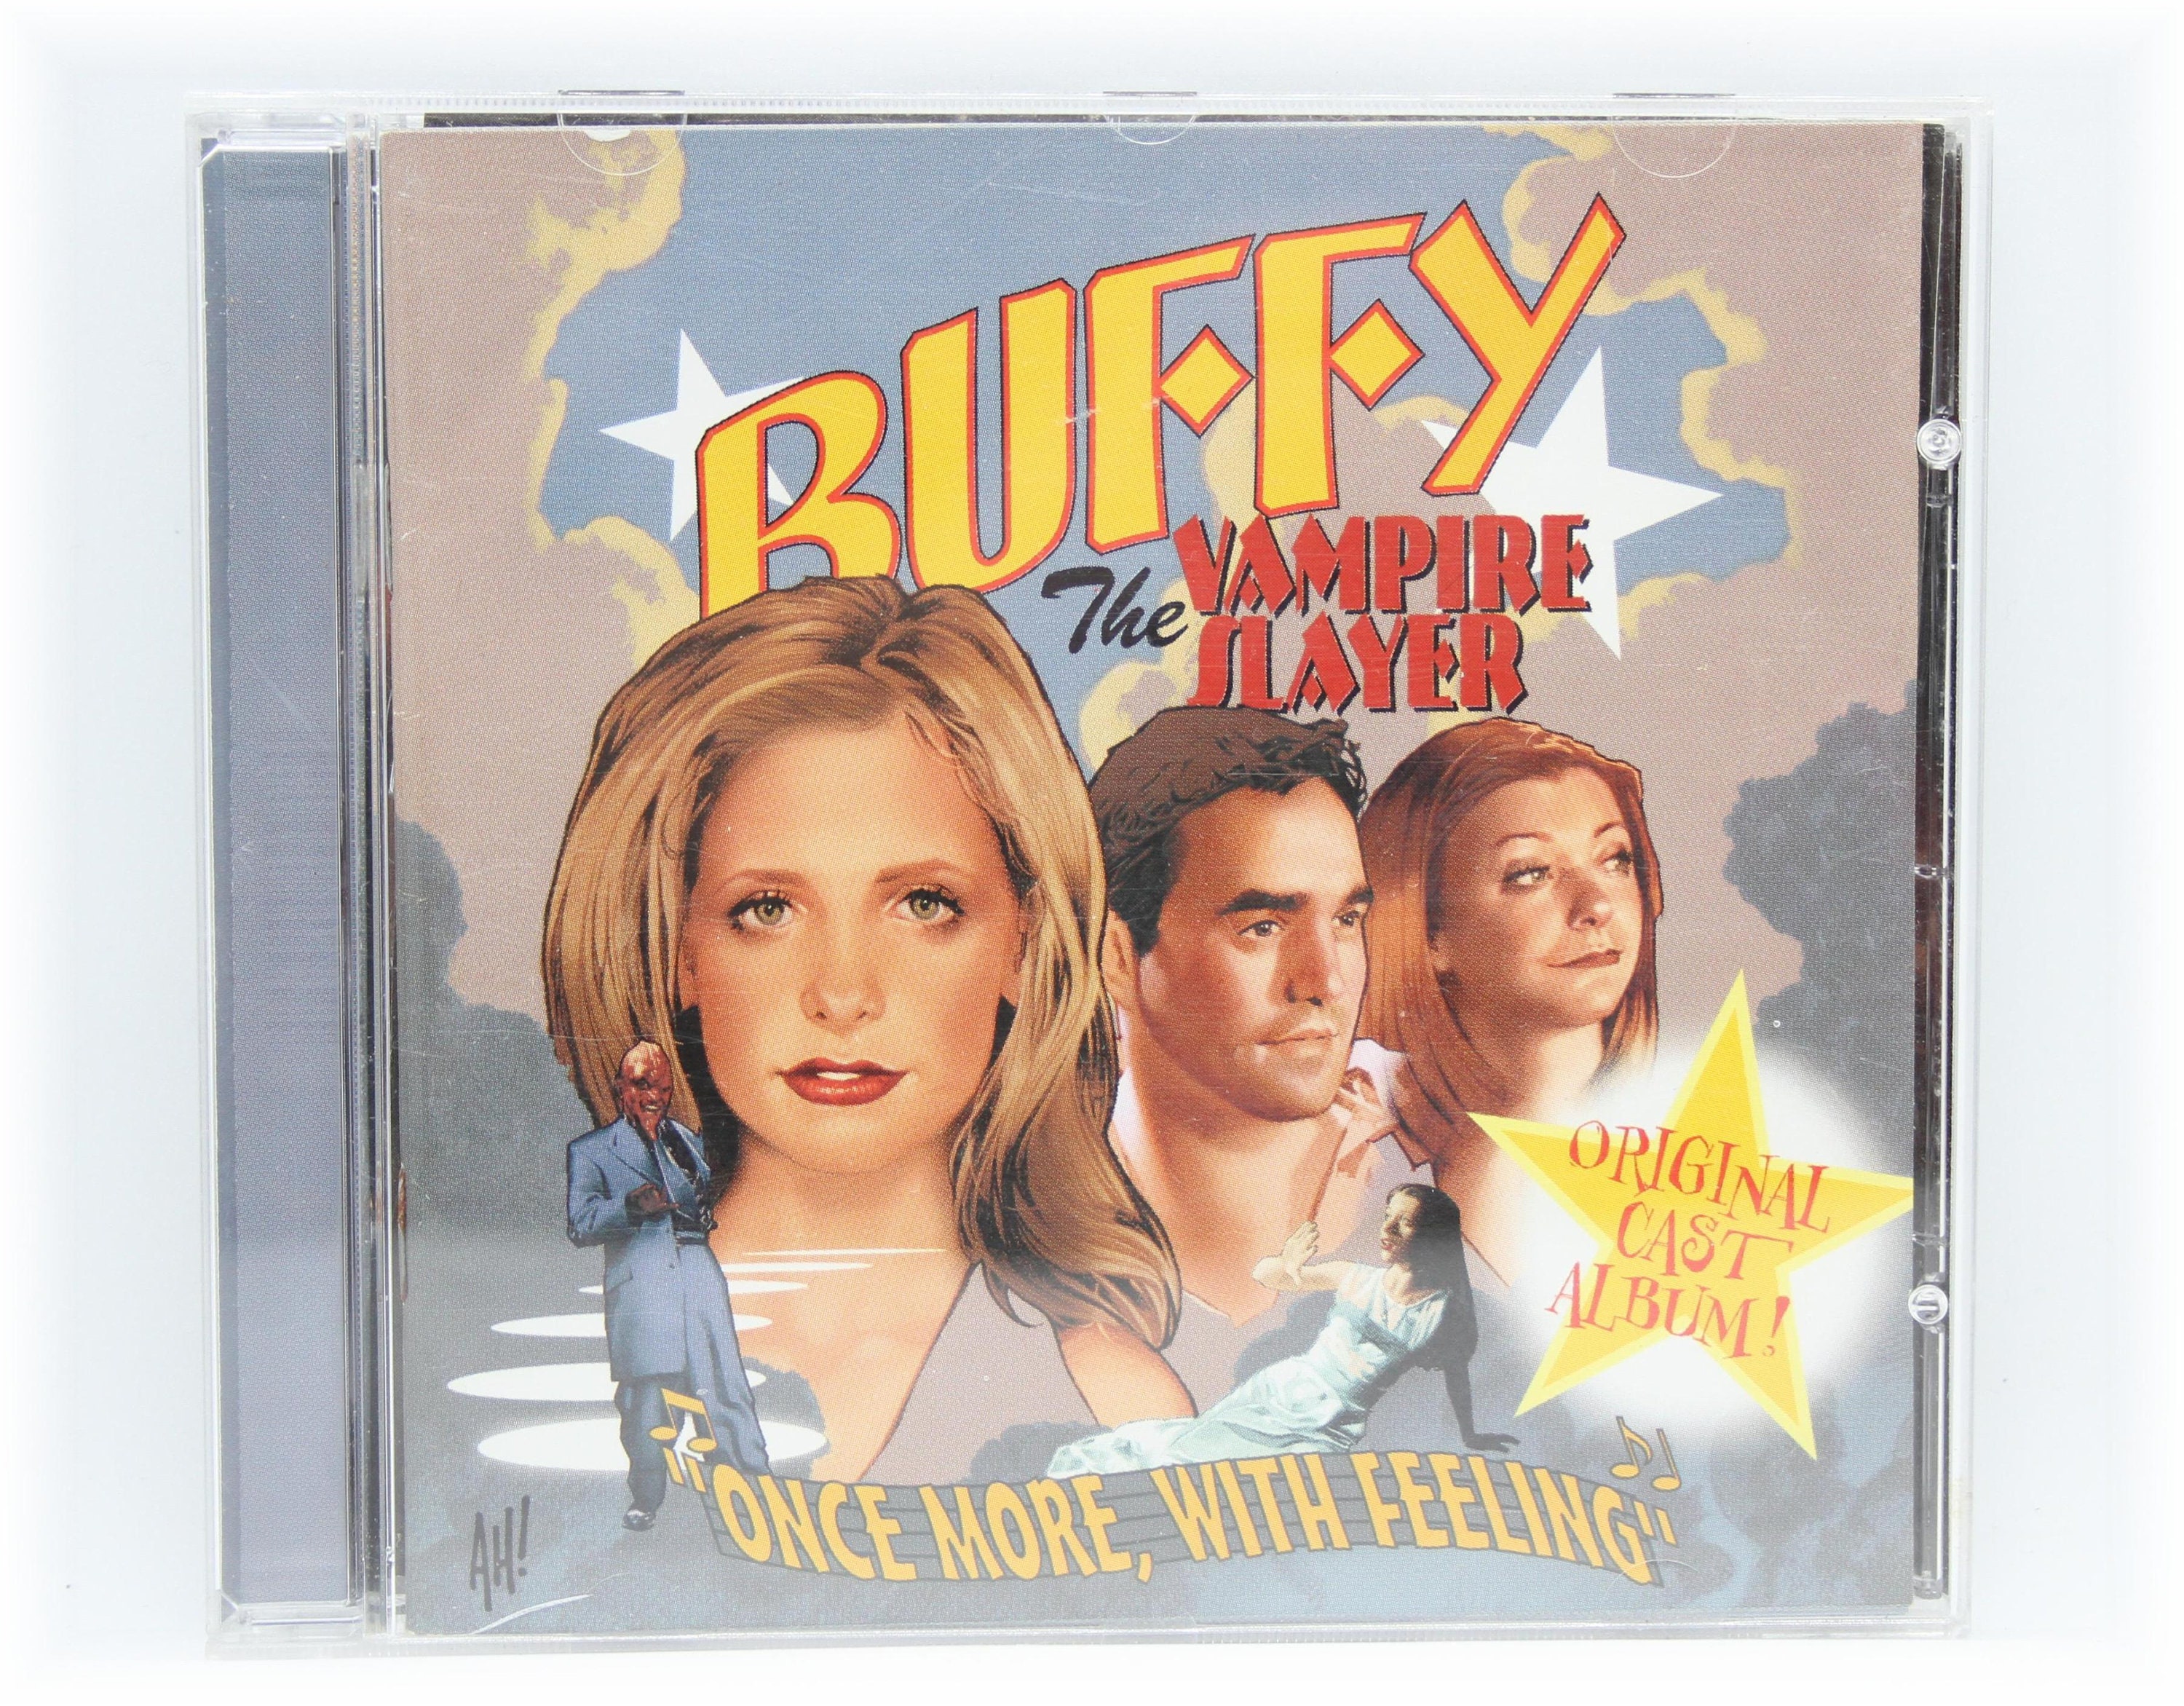 audrey force recommends buffy the vampire layer pic